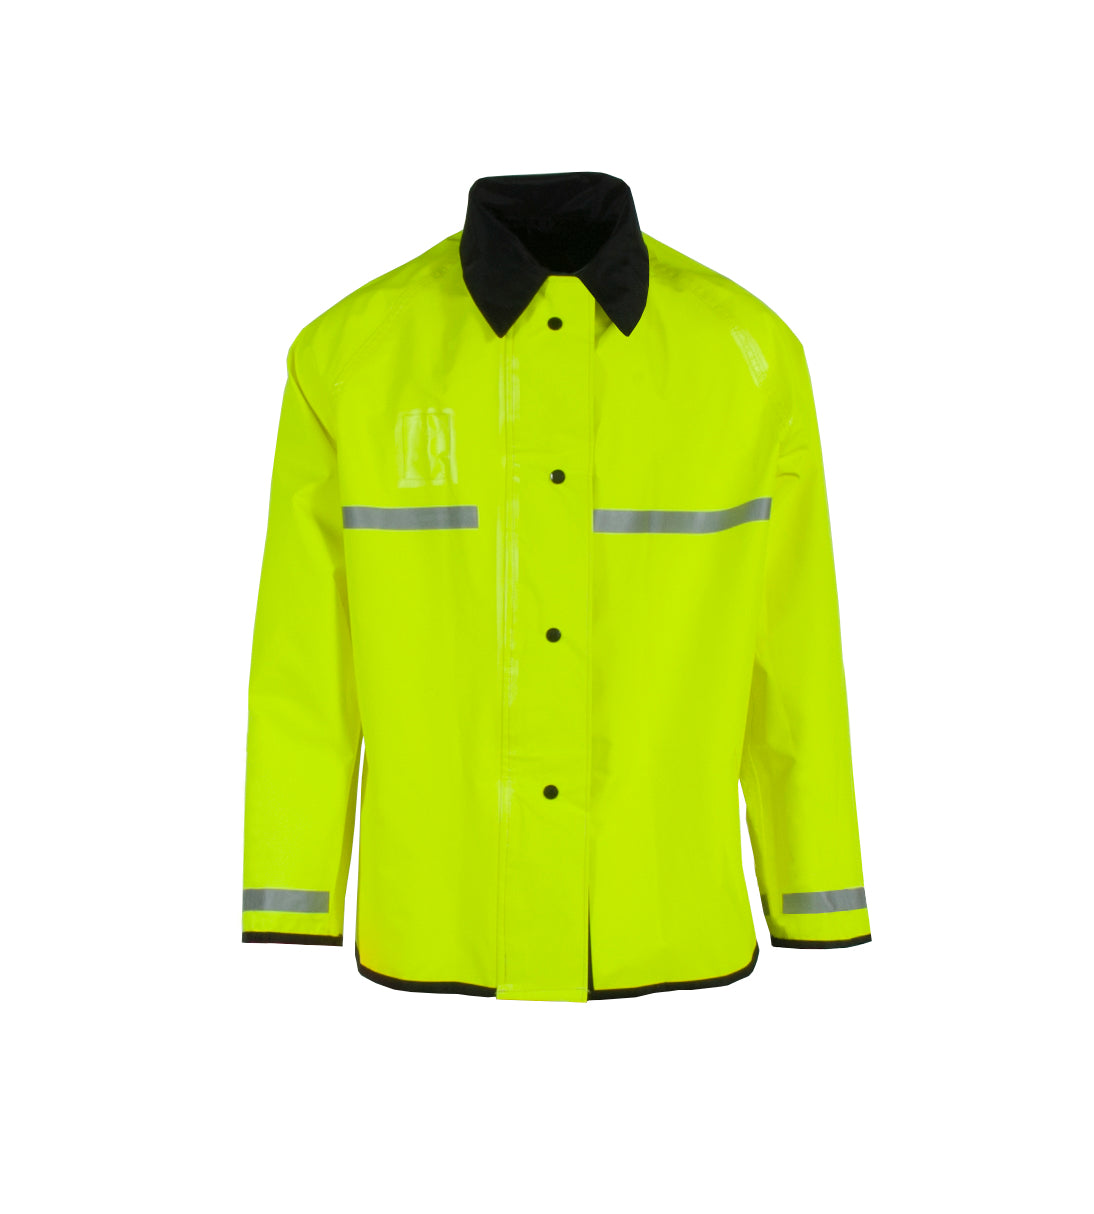 Neese 475 Duty Series Reversible Jacket with 3M Reflective Taping